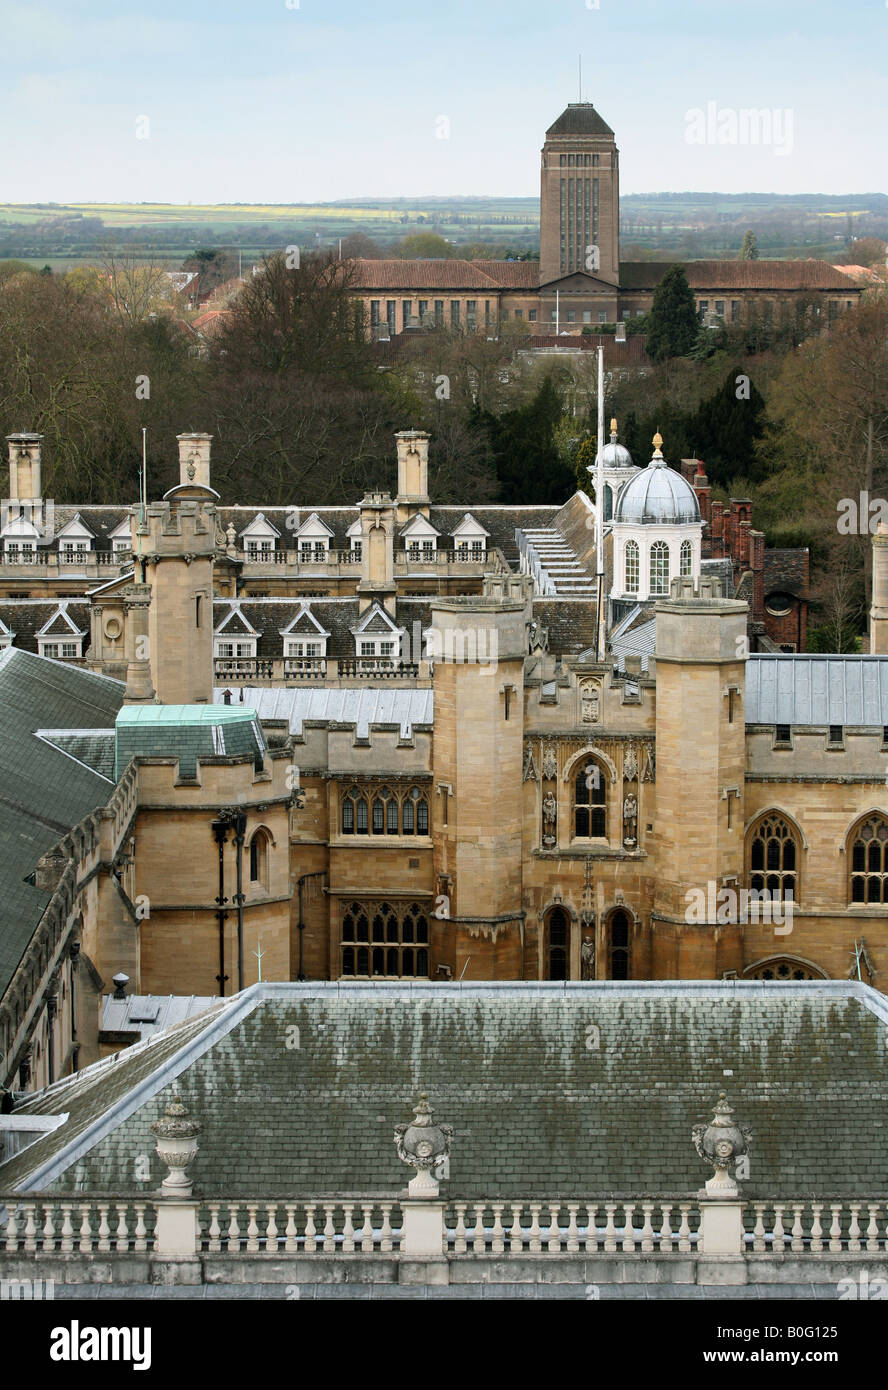 A view across the Senate House and Clare College to the University Library, Cambridge Stock Photo